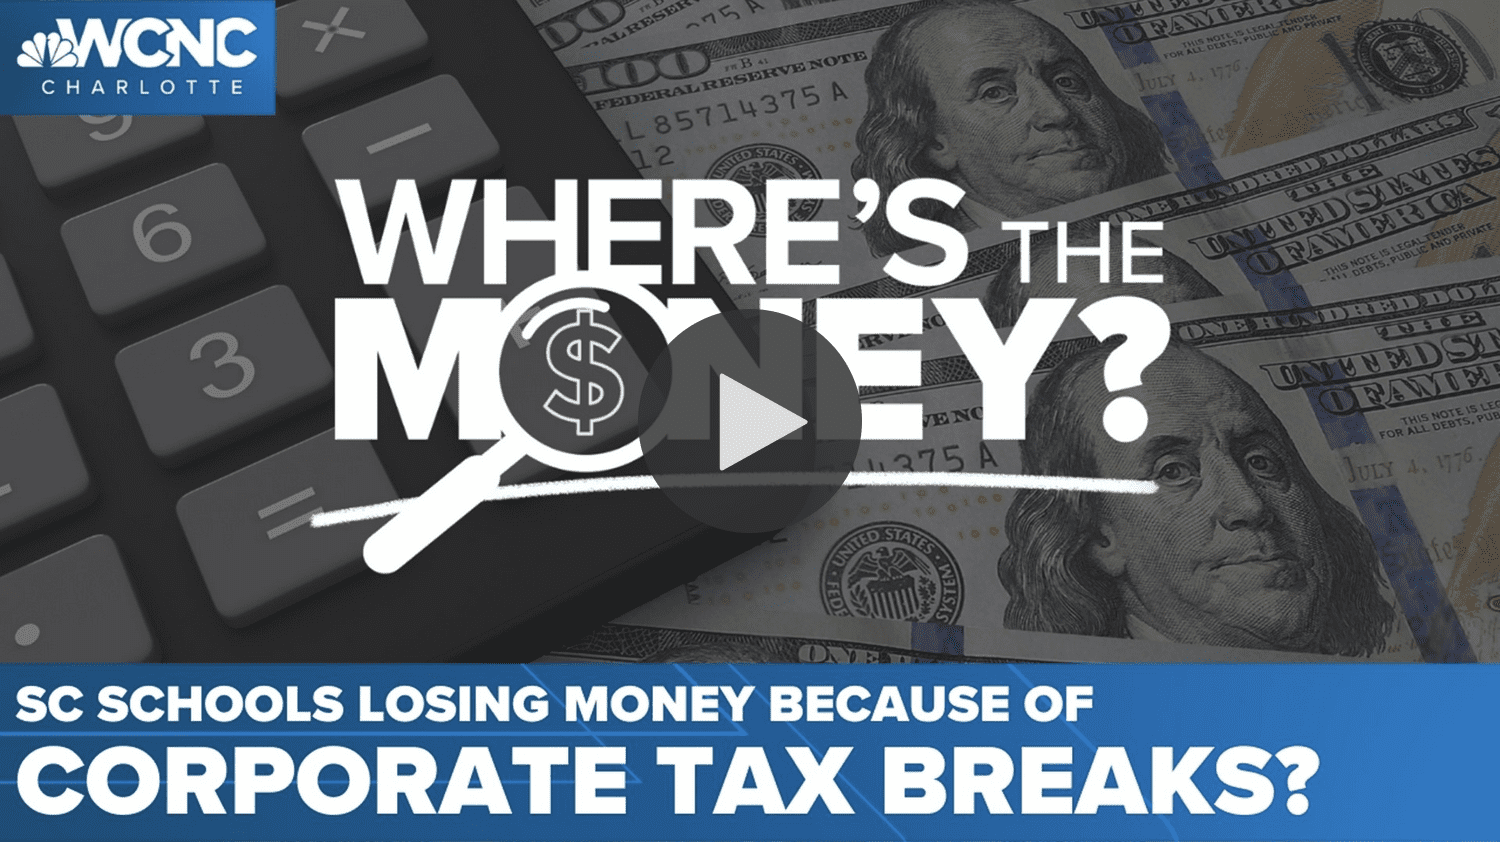 Text says "Where's the money? SC schools losing money because of corporate tax breaks"